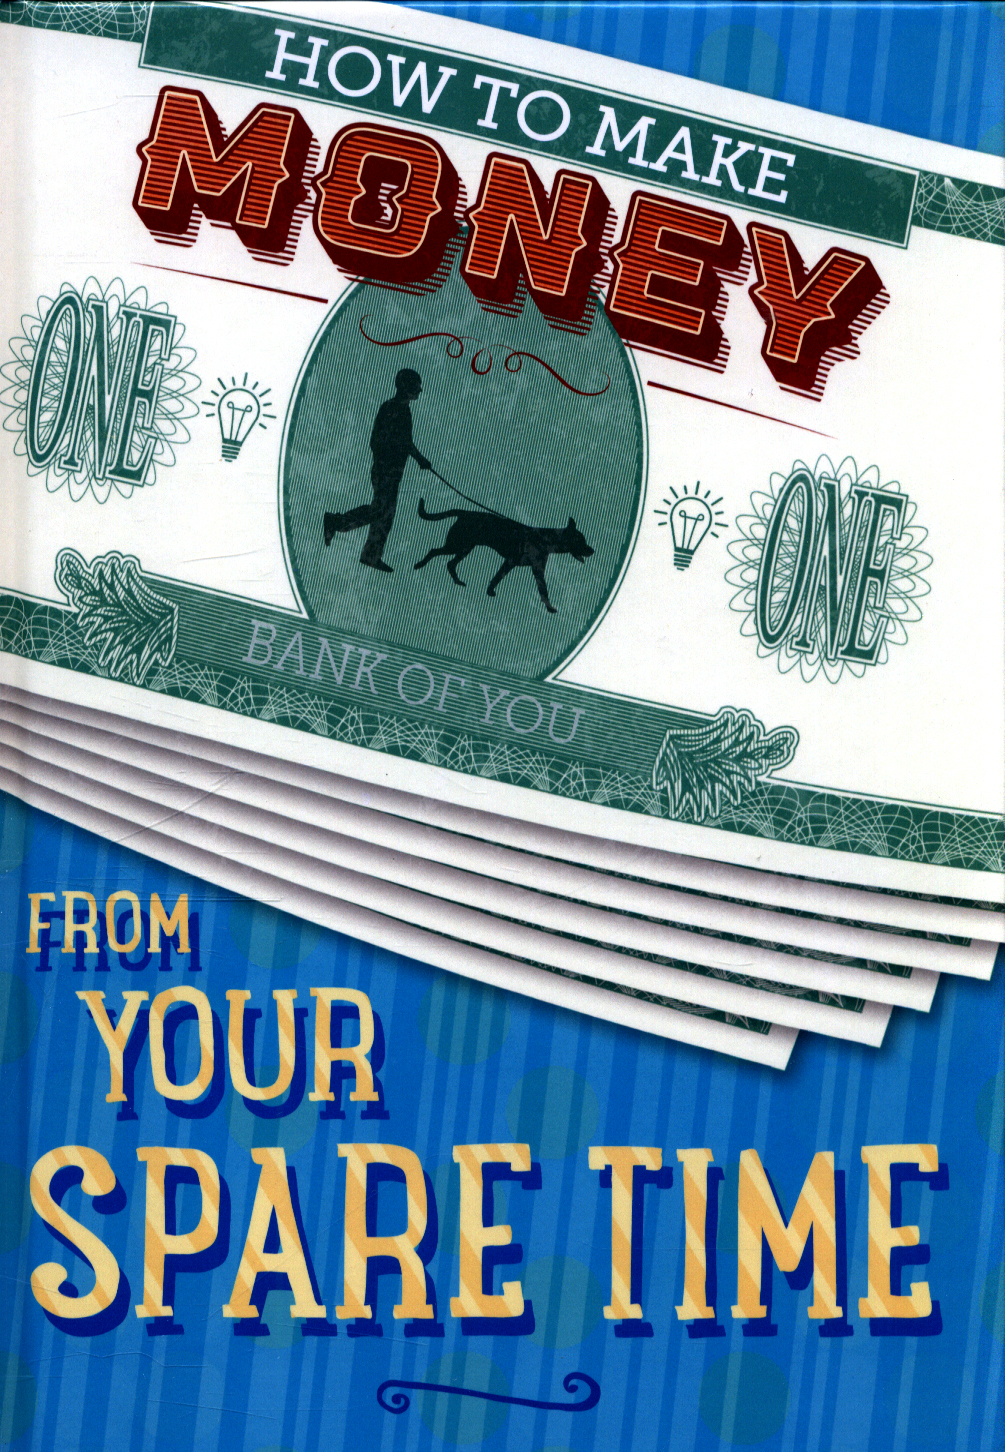 how to make money in your spare time book pdf 